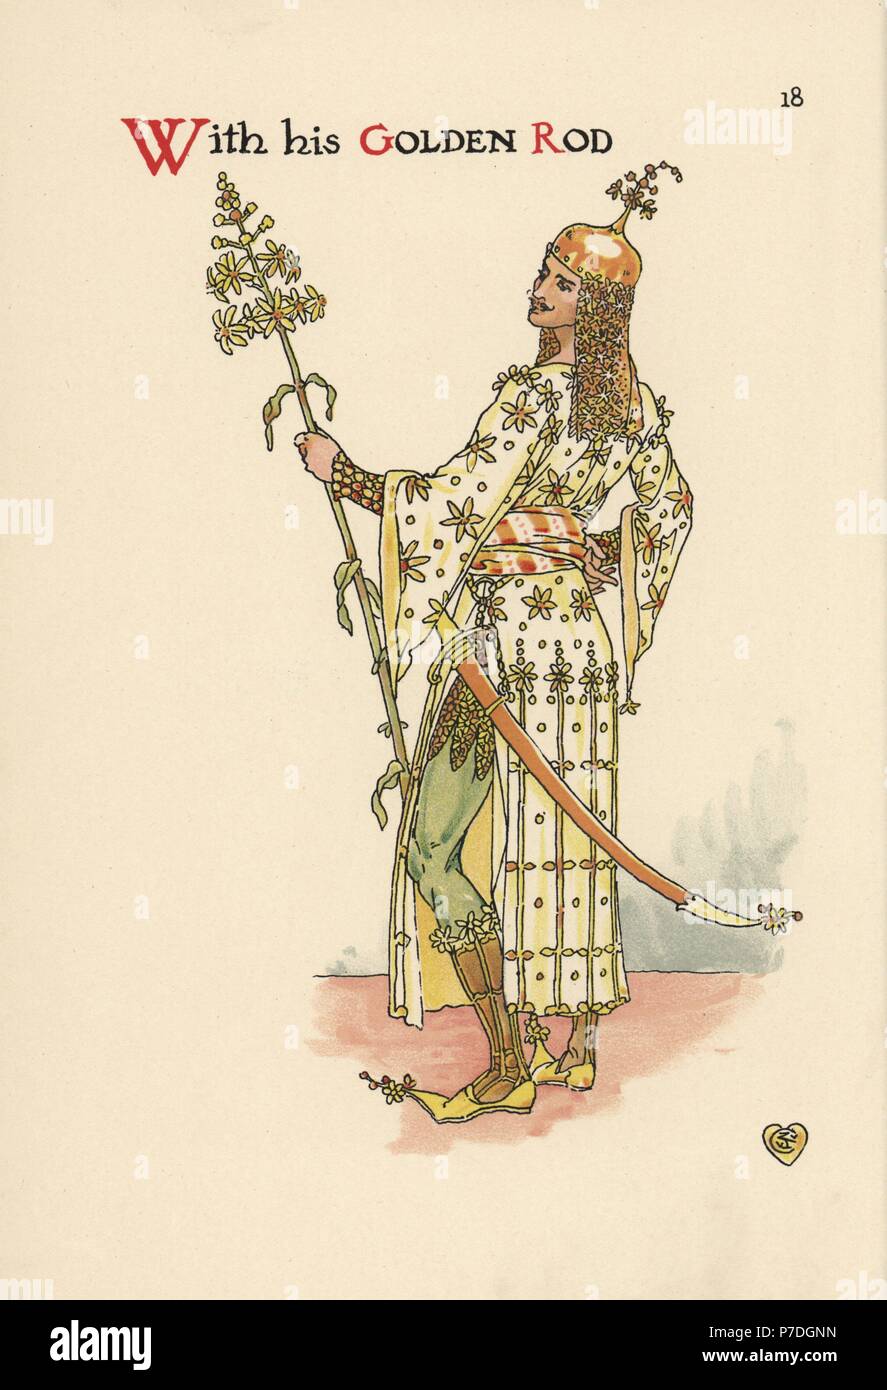 Flower fairy of golden rod, Solidago species, as an eastern warrior with helmet, tunic, scimitar and pointed shoes. Chromolithograph after an illustration by Walter Crane from A Flower Wedding, Cassell, London, 1905. Stock Photo